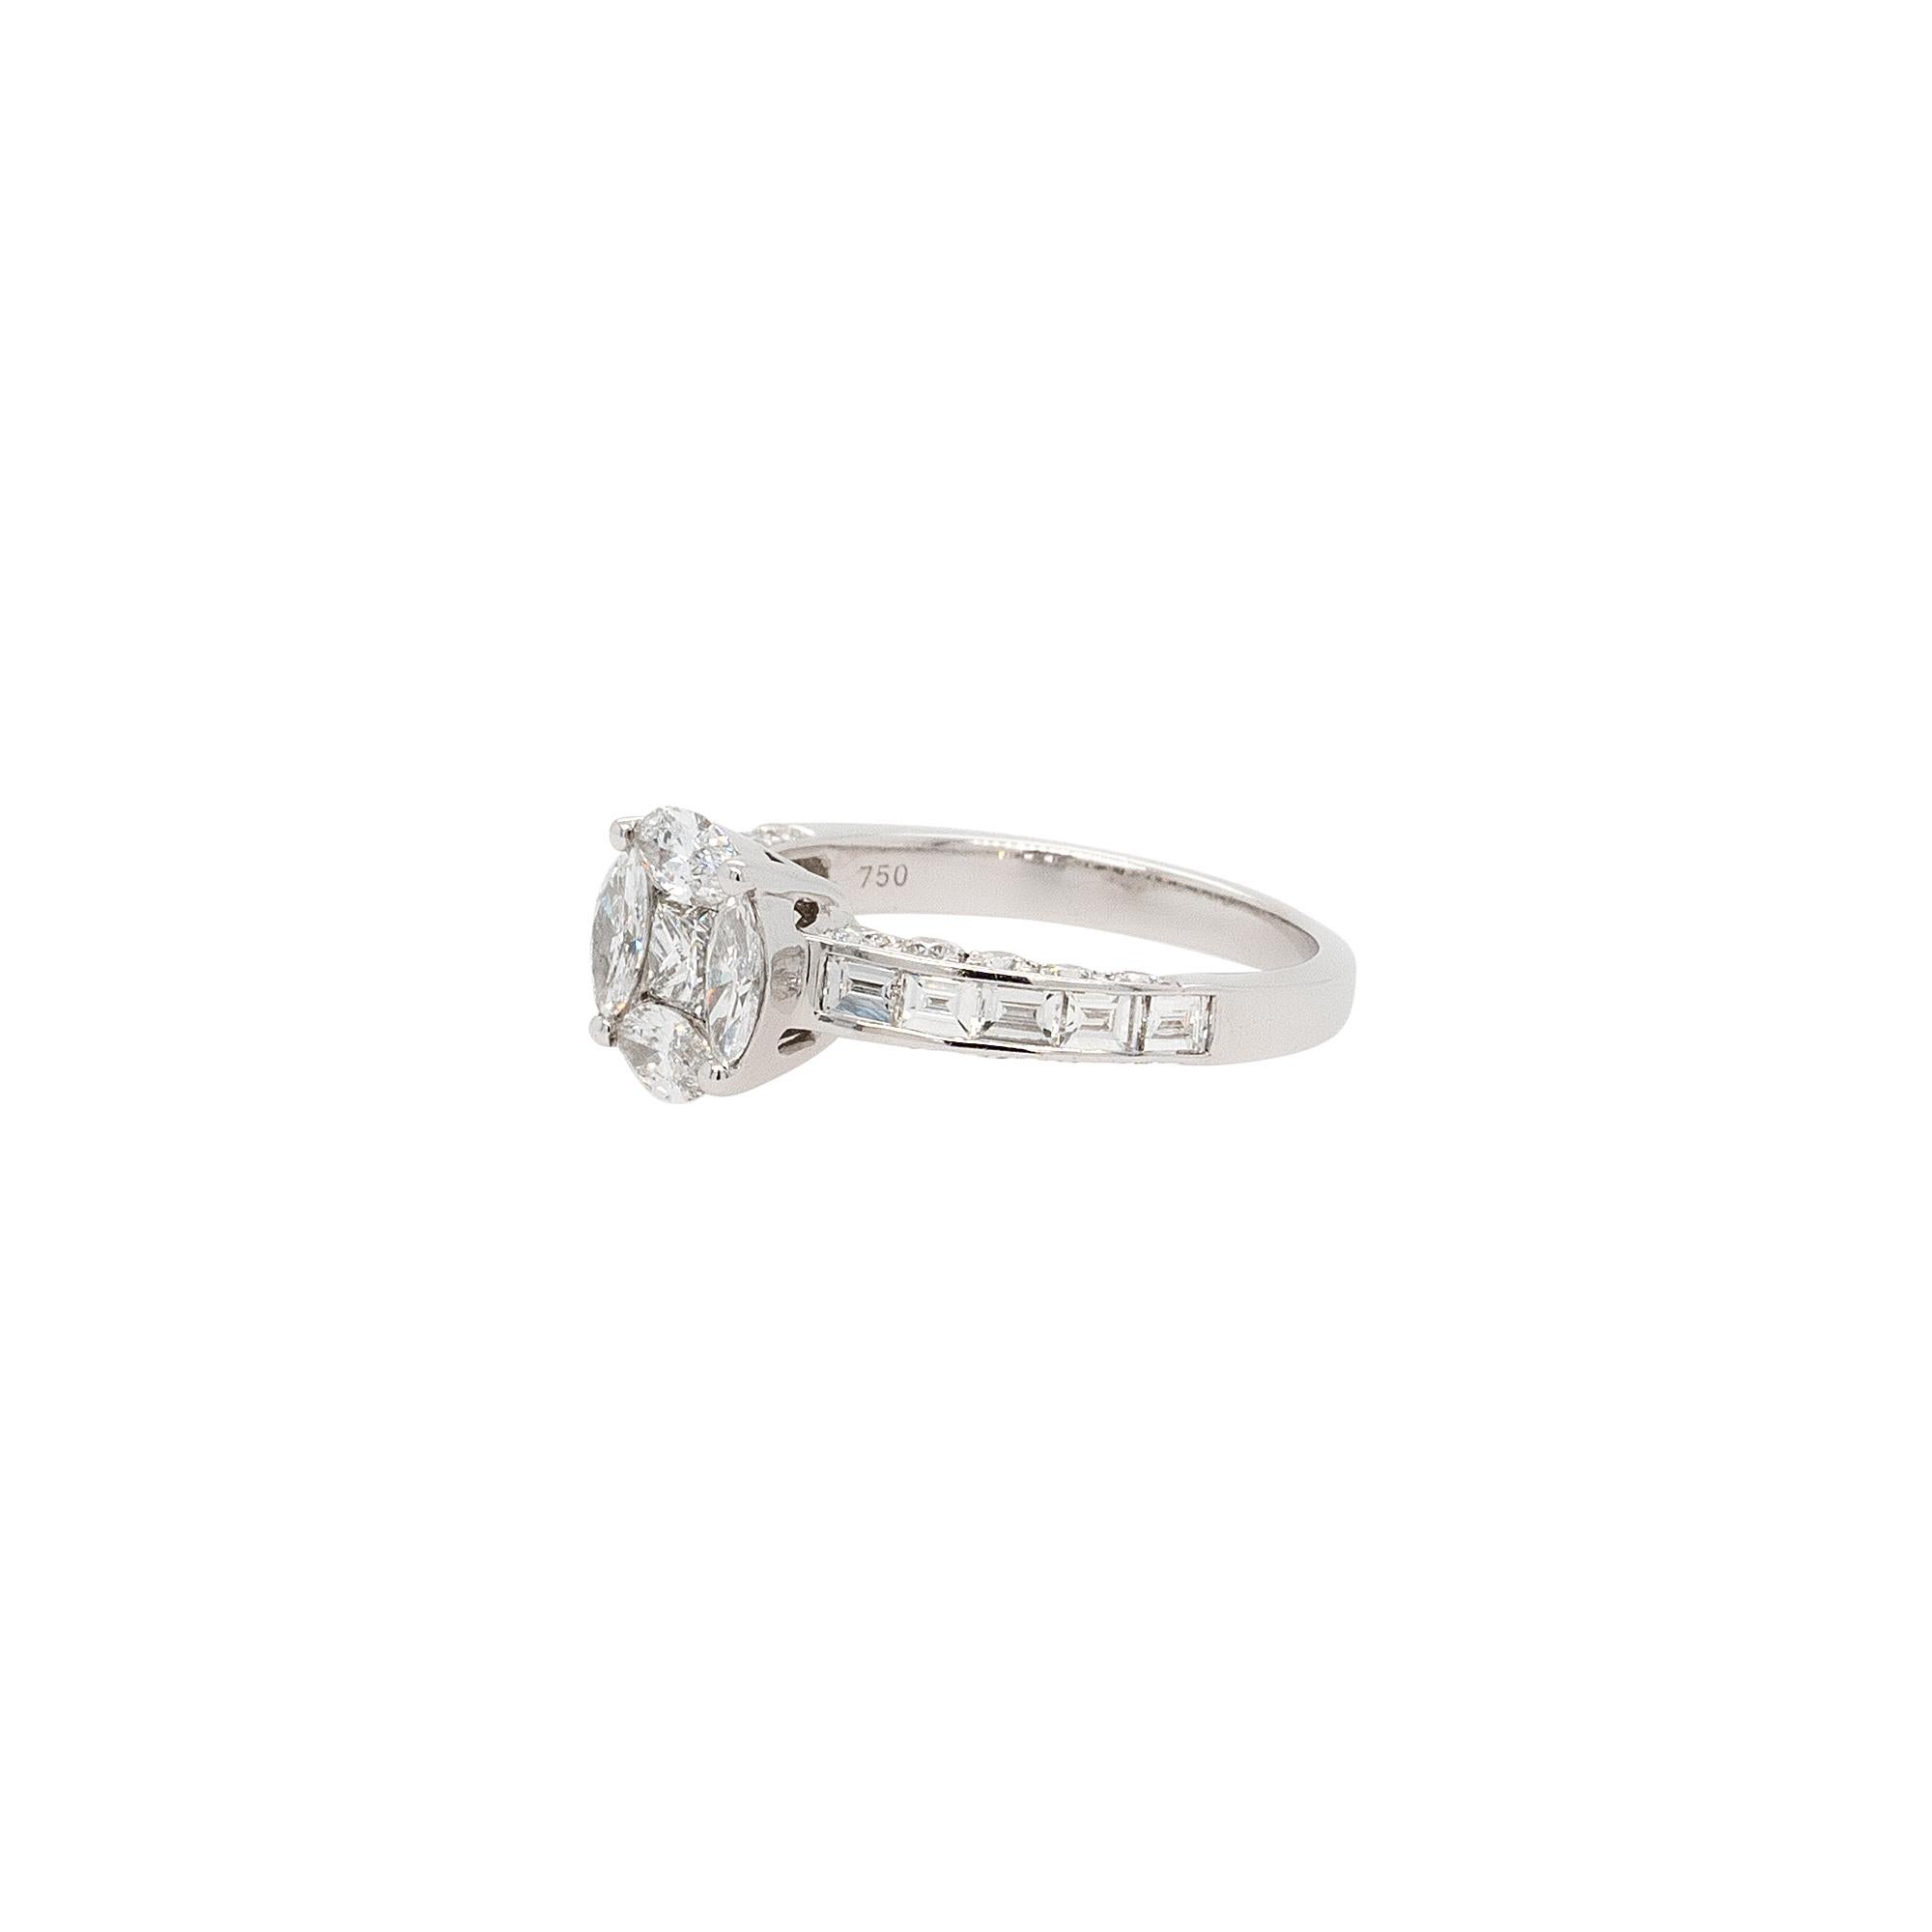 Center Details:
Approx 0.58ct Marquise and Princess Center
G/H Color SI Clarity
Sides Stones Details: 
0.4ctw Baguettes
G/H color SI clarity
Ring Material: 18k White Gold
Ring Size: 6.5 (can be sized)
Total Weight: 3.58g (2.30dwt)
This item comes